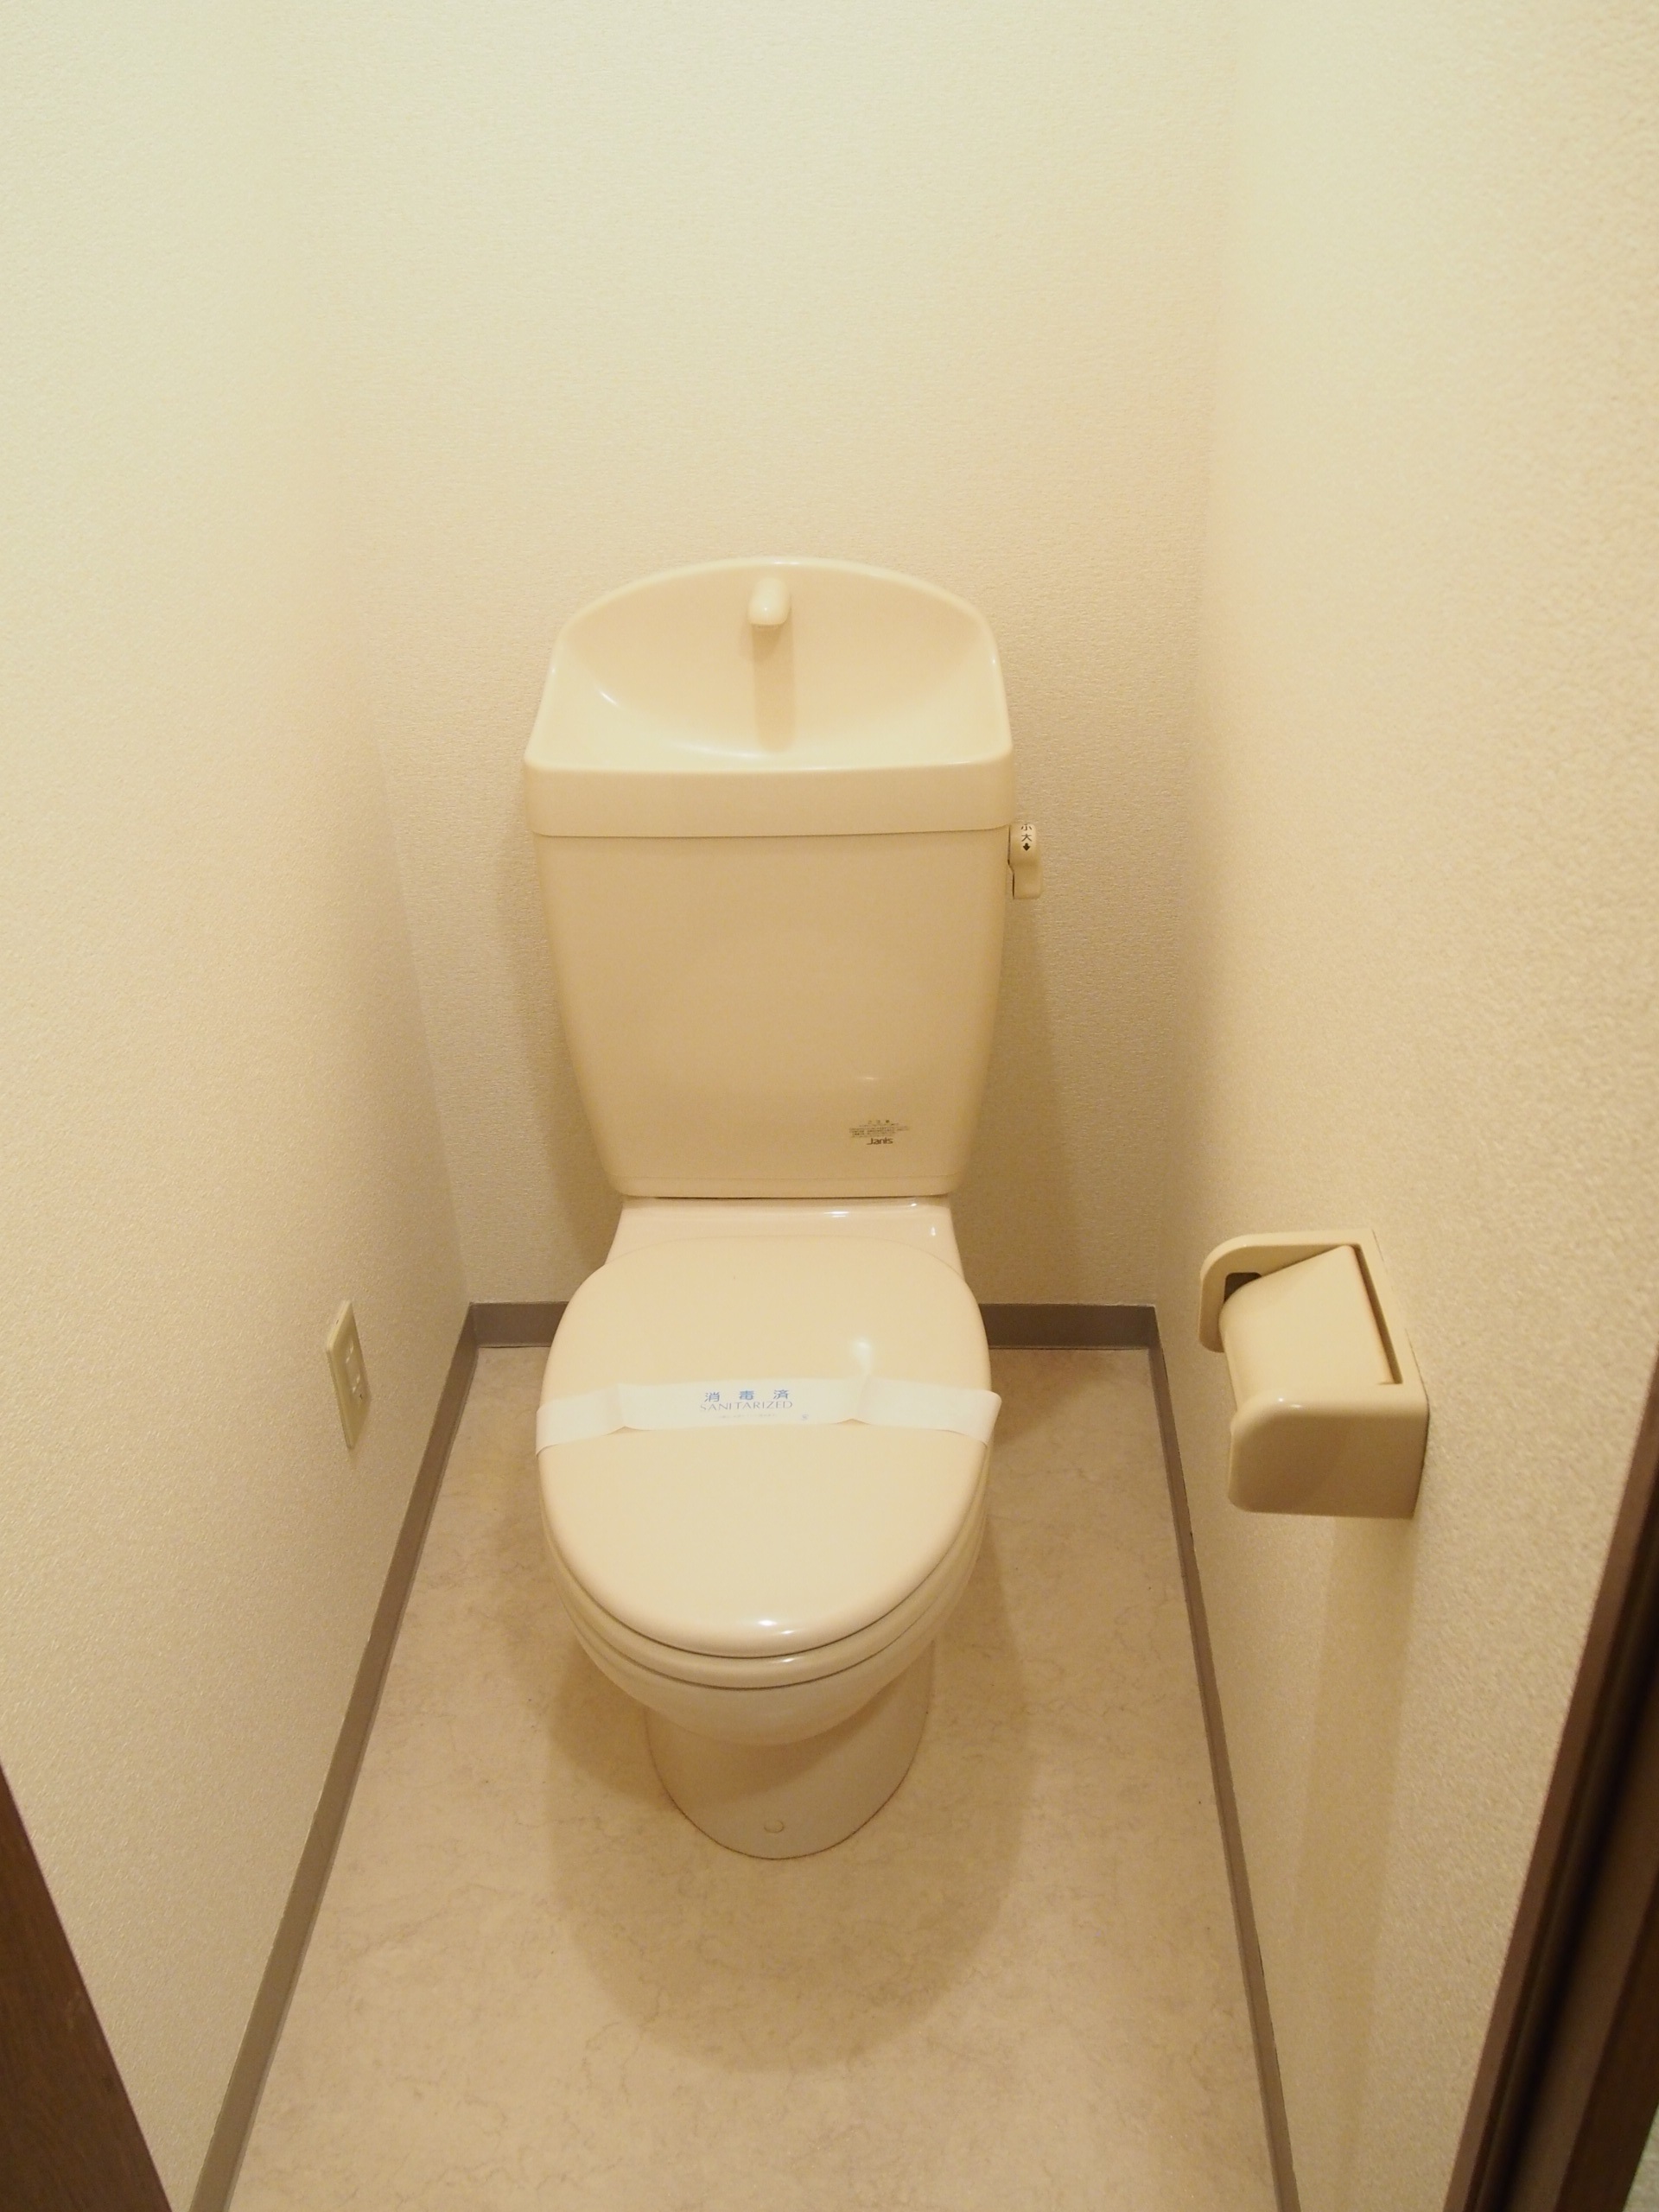 Toilet. Fairly common toilet. But calm or it is why.